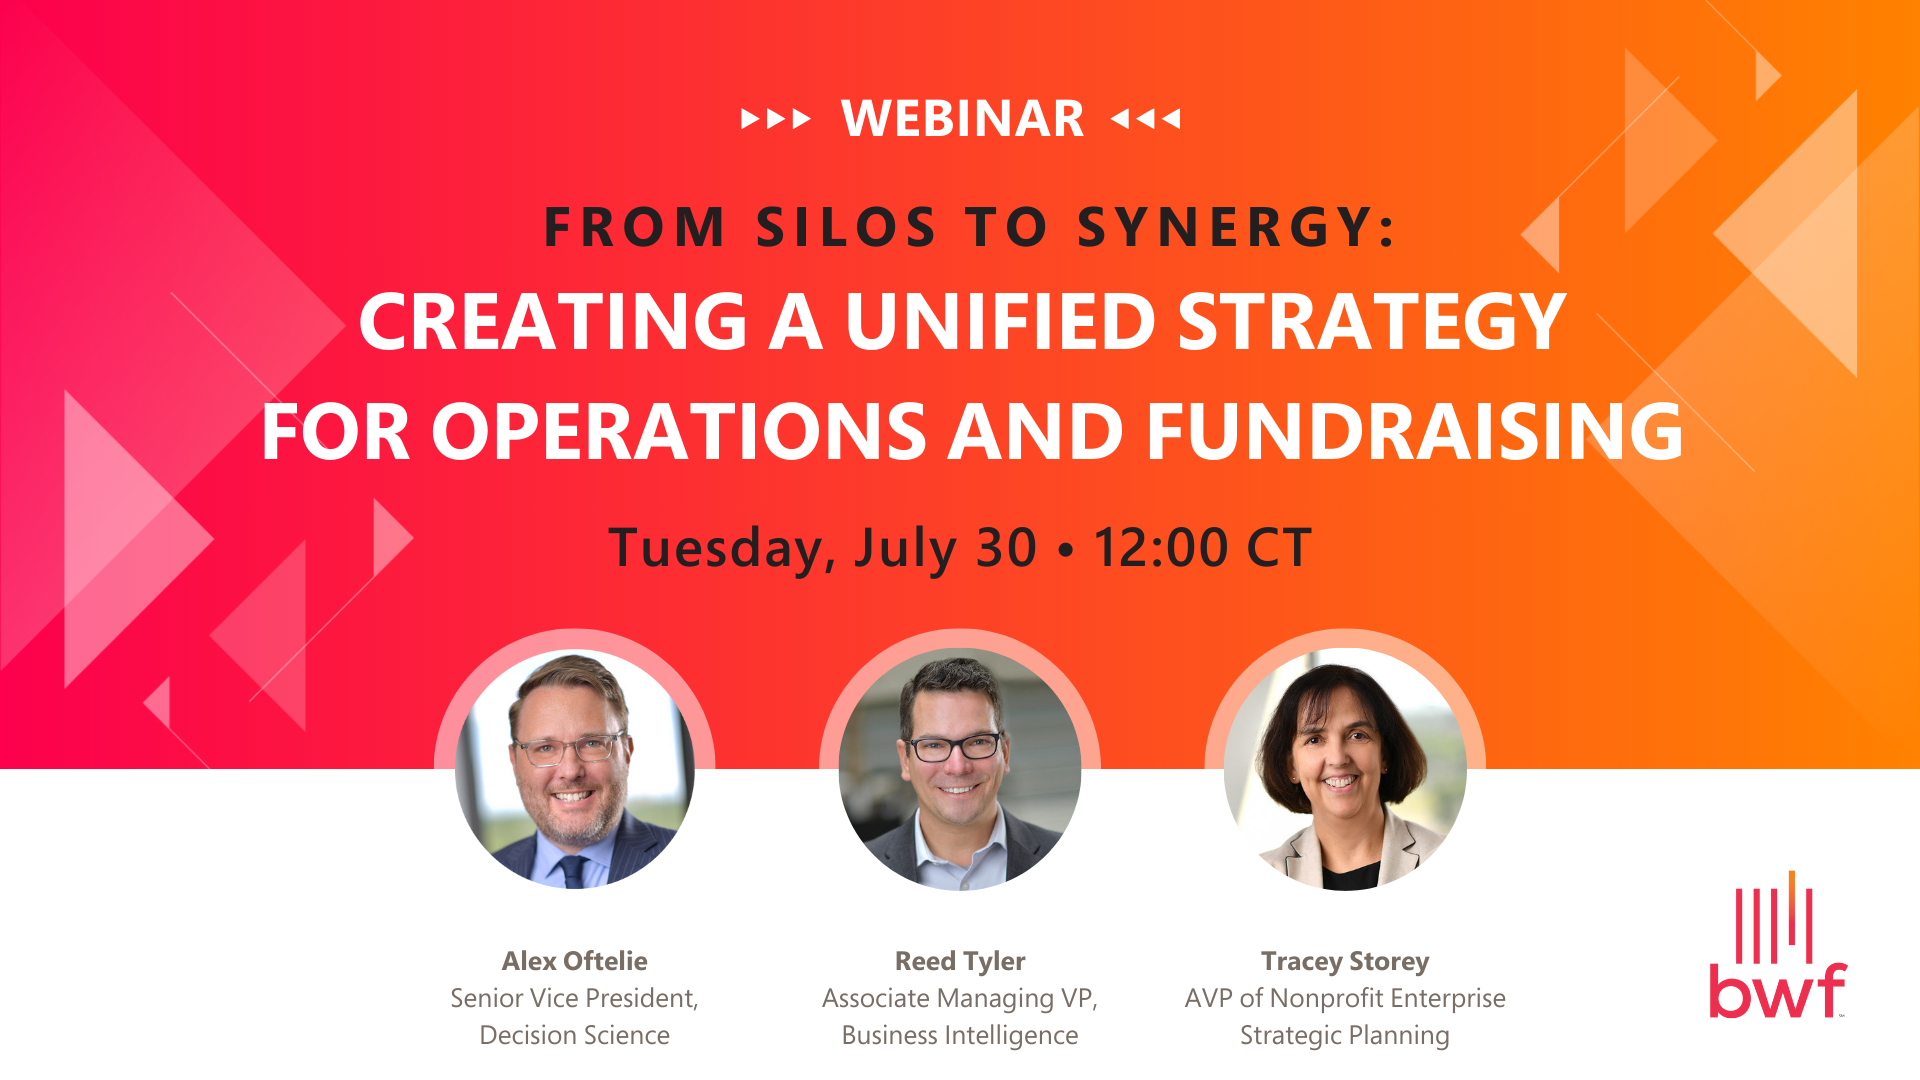 From Silos to Synergy: Creating a Unified Strategy for Operations and Fundraising